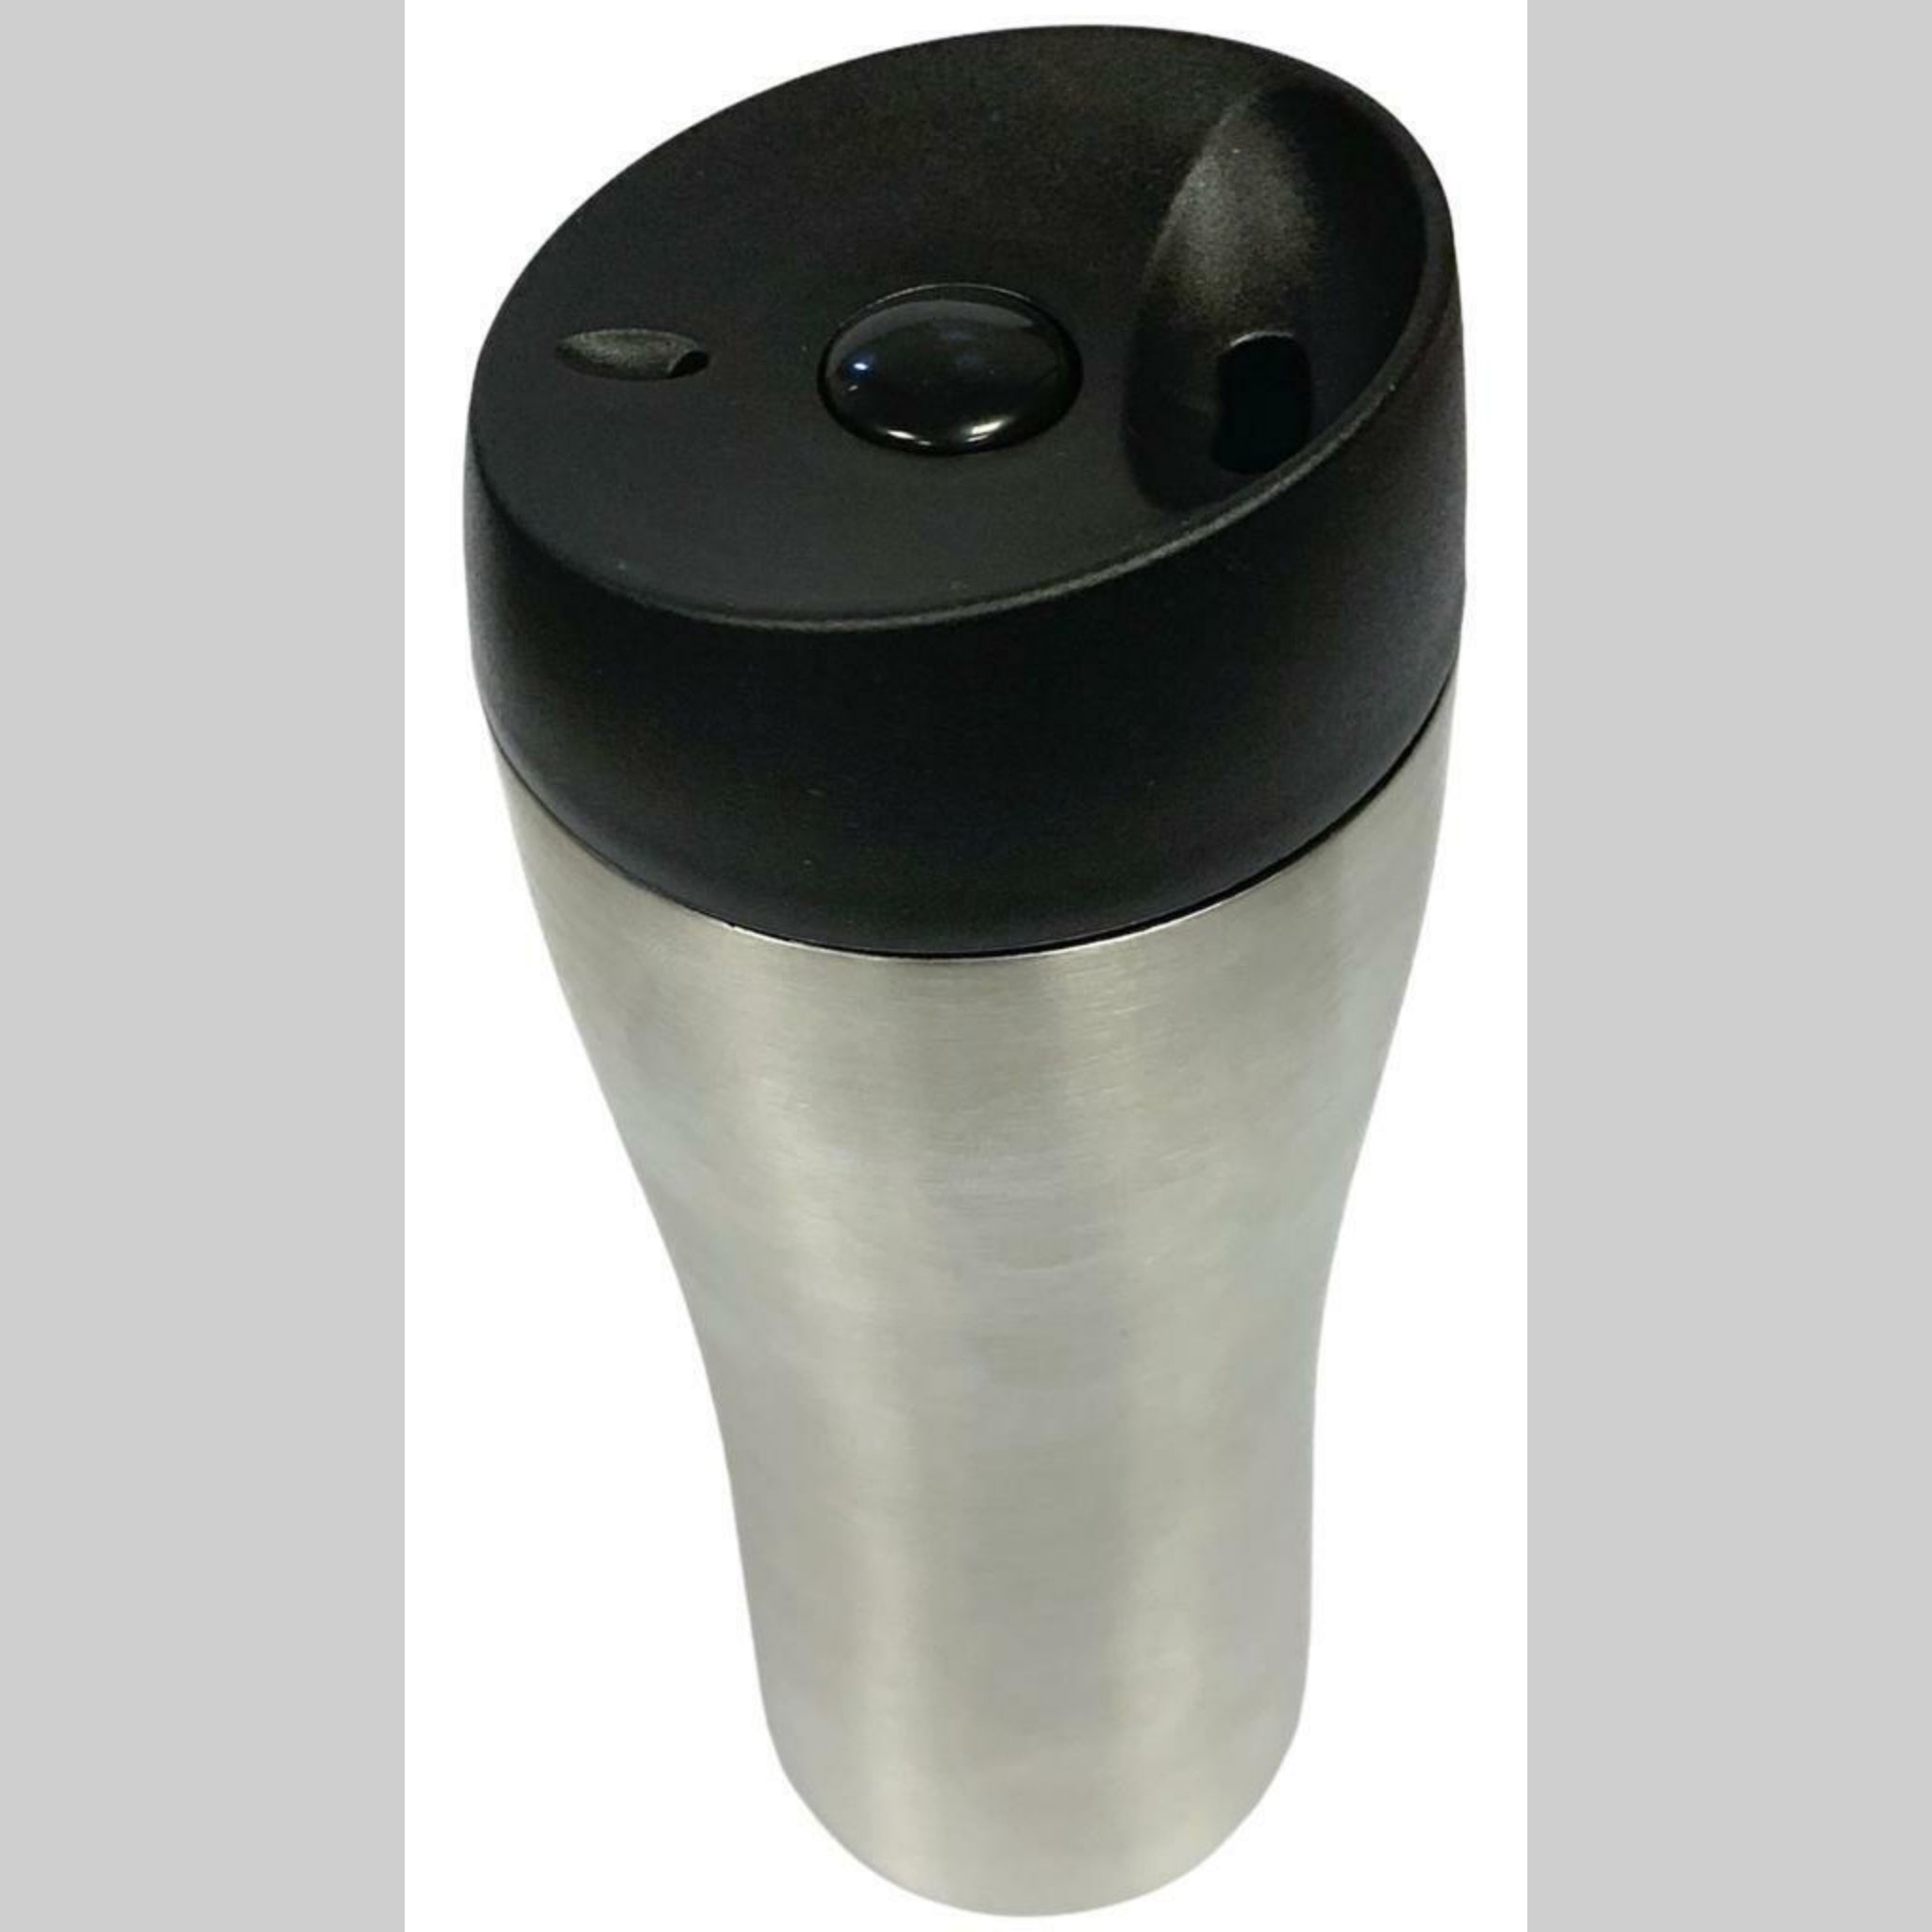 Beclen Harp AA Vaccum Insulated Travel Cup/Mug Tumbler With Push Lock Anti-Spill Lid-Your Perfect Travel Companion